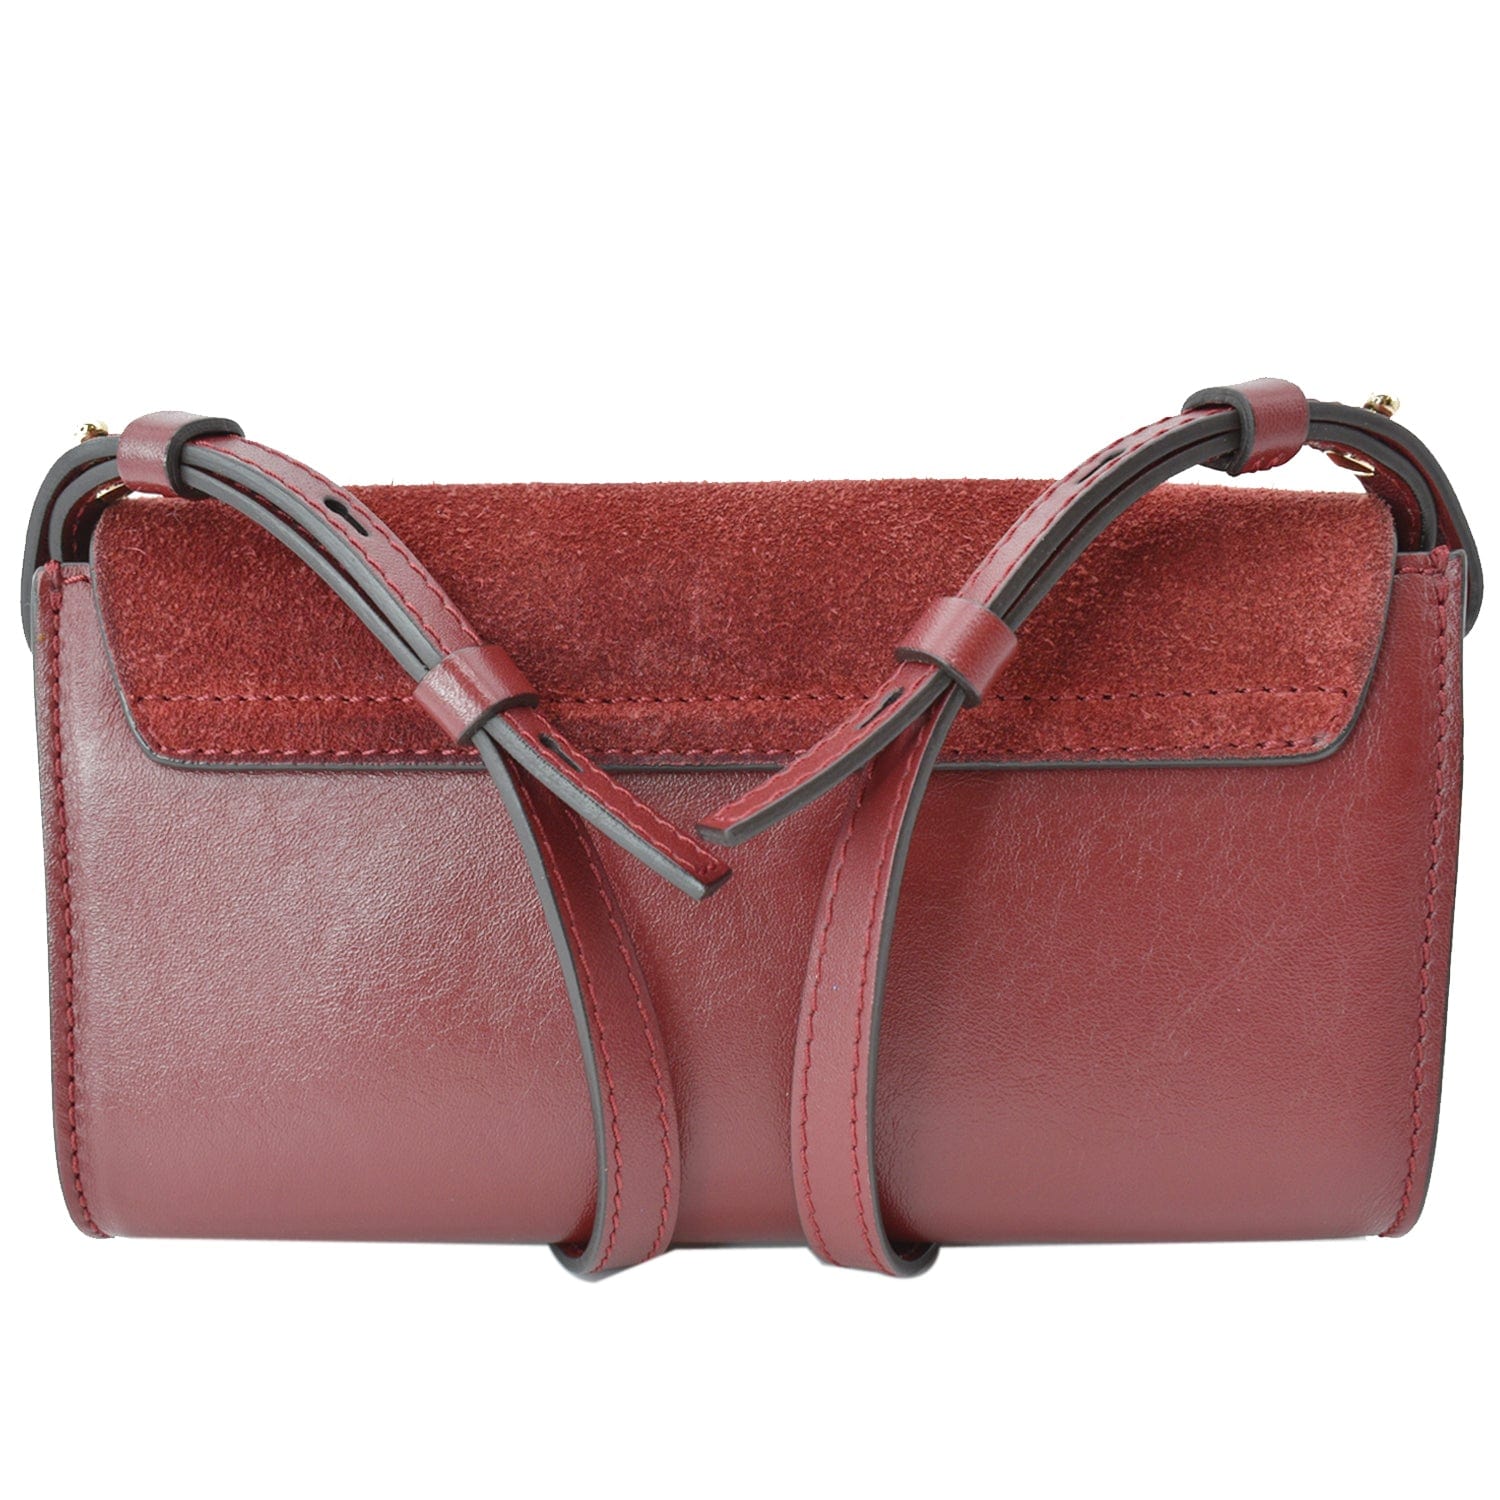 Faye day leather handbag Chloé Red in Leather - 13702229